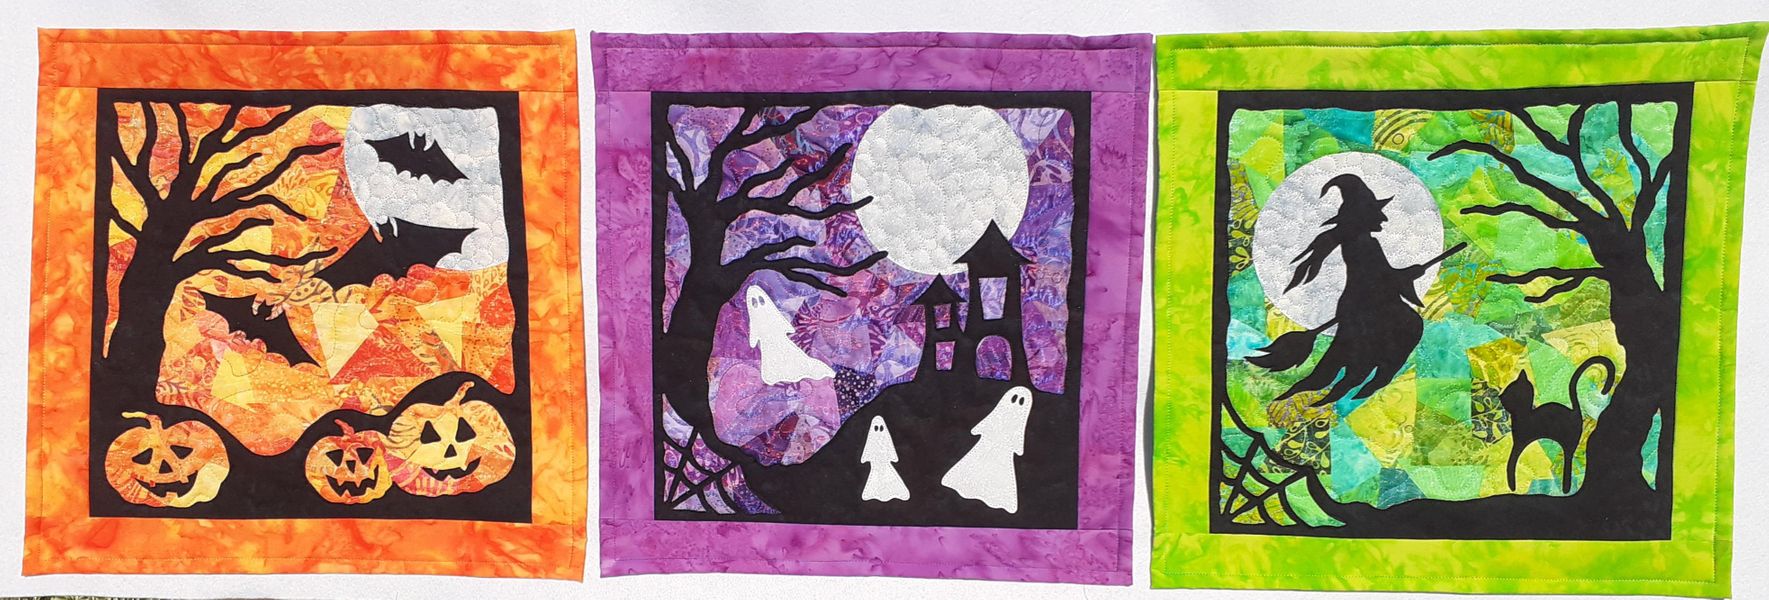 3 designs to choose from! Combine collage, applique and freemotion machining in one striking image.